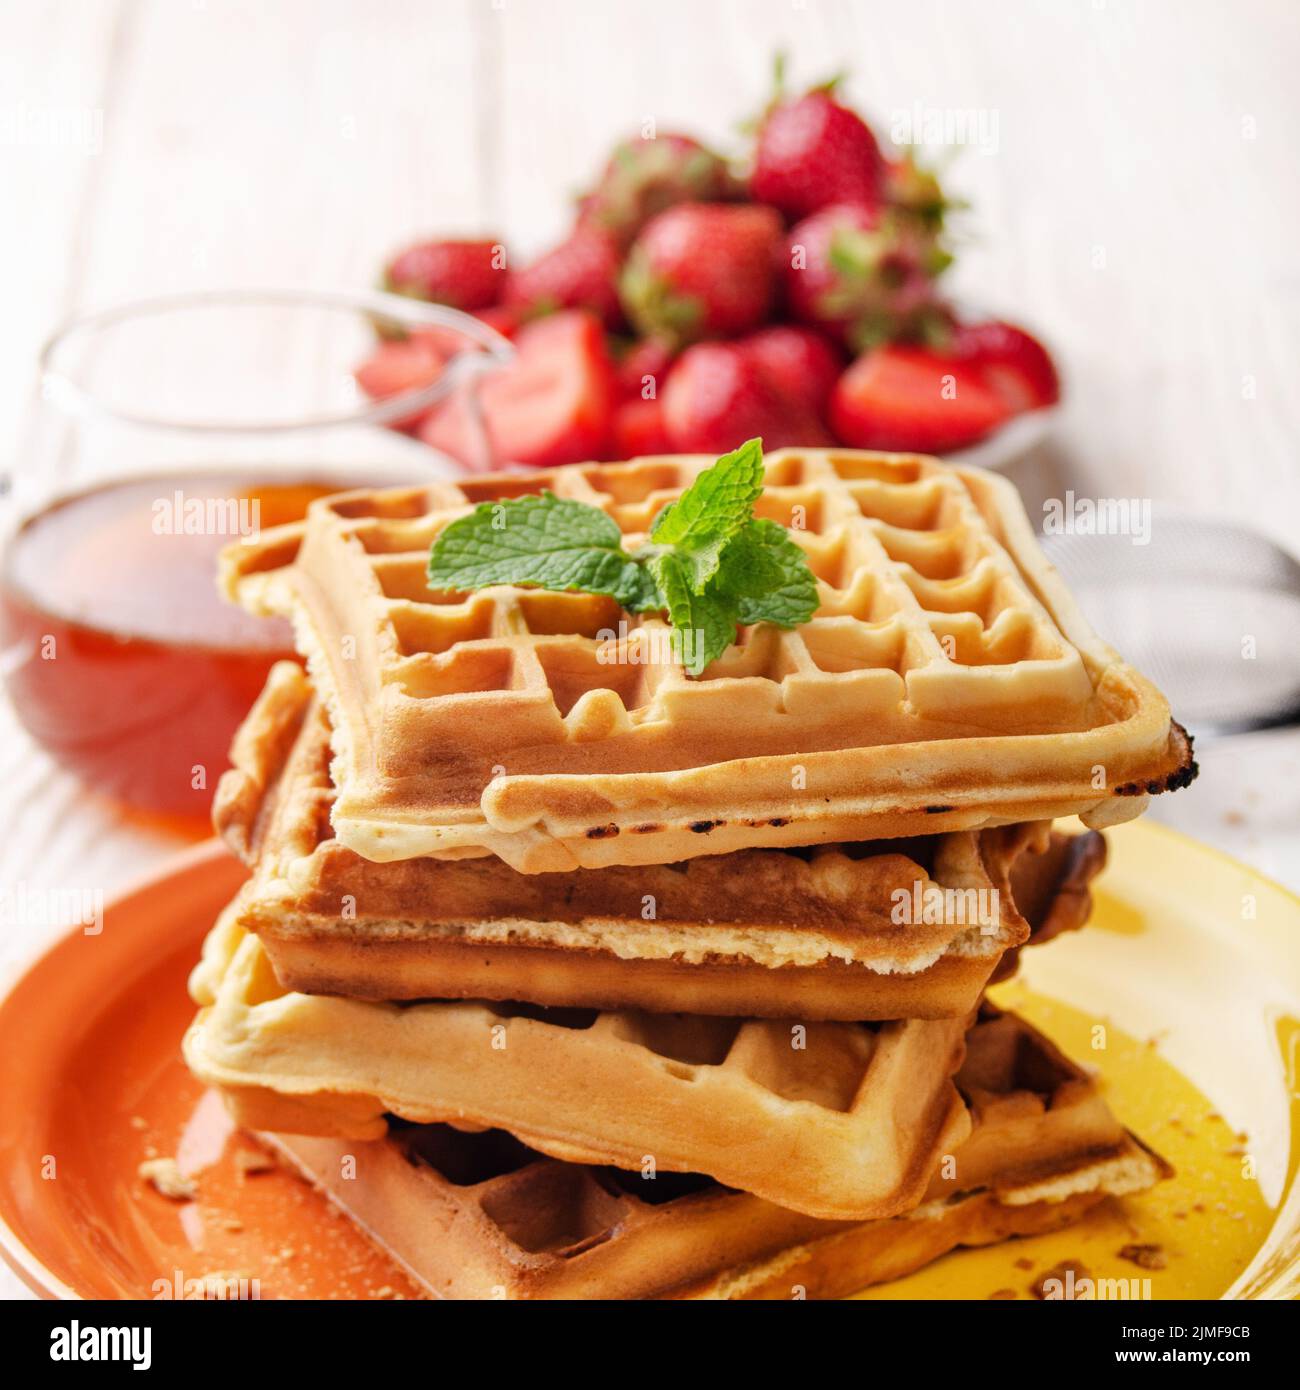 Pile of belgian waffles on white wooden kitchen table with strawberries and syrup aside Stock Photo